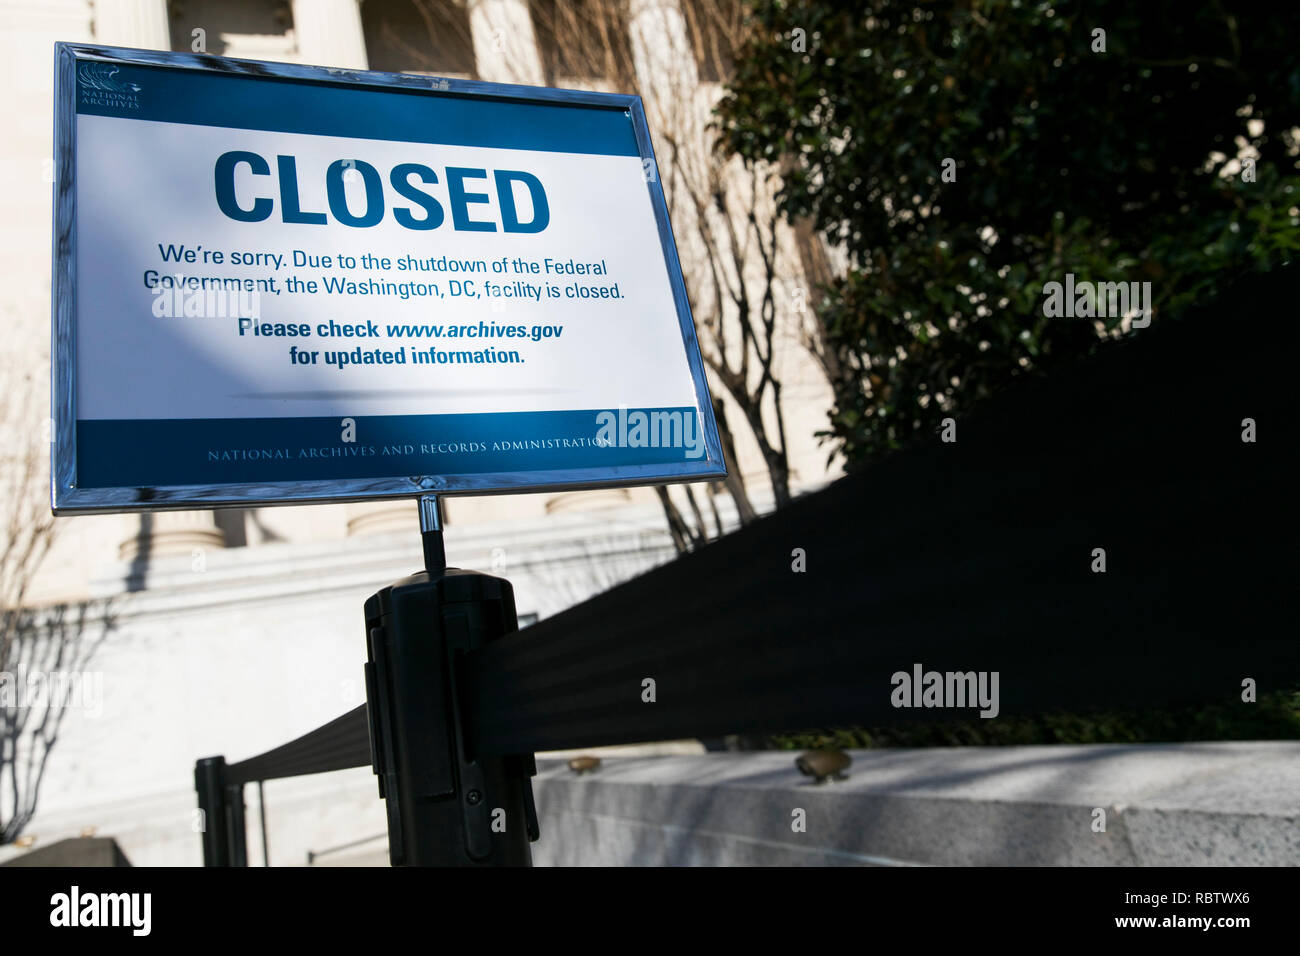 Washington, DC, USA. 11th Jan, 2019. A sign outside of the National Archives Building informing visitors that the building is closed due to the partial Government shutdown in Washington, DC on January 11, 2019. The shutdown, now entering it's 22nd day, is the longest Government shutdown in U.S. history. Credit: Kristoffer Tripplaar/Alamy Live News Stock Photo